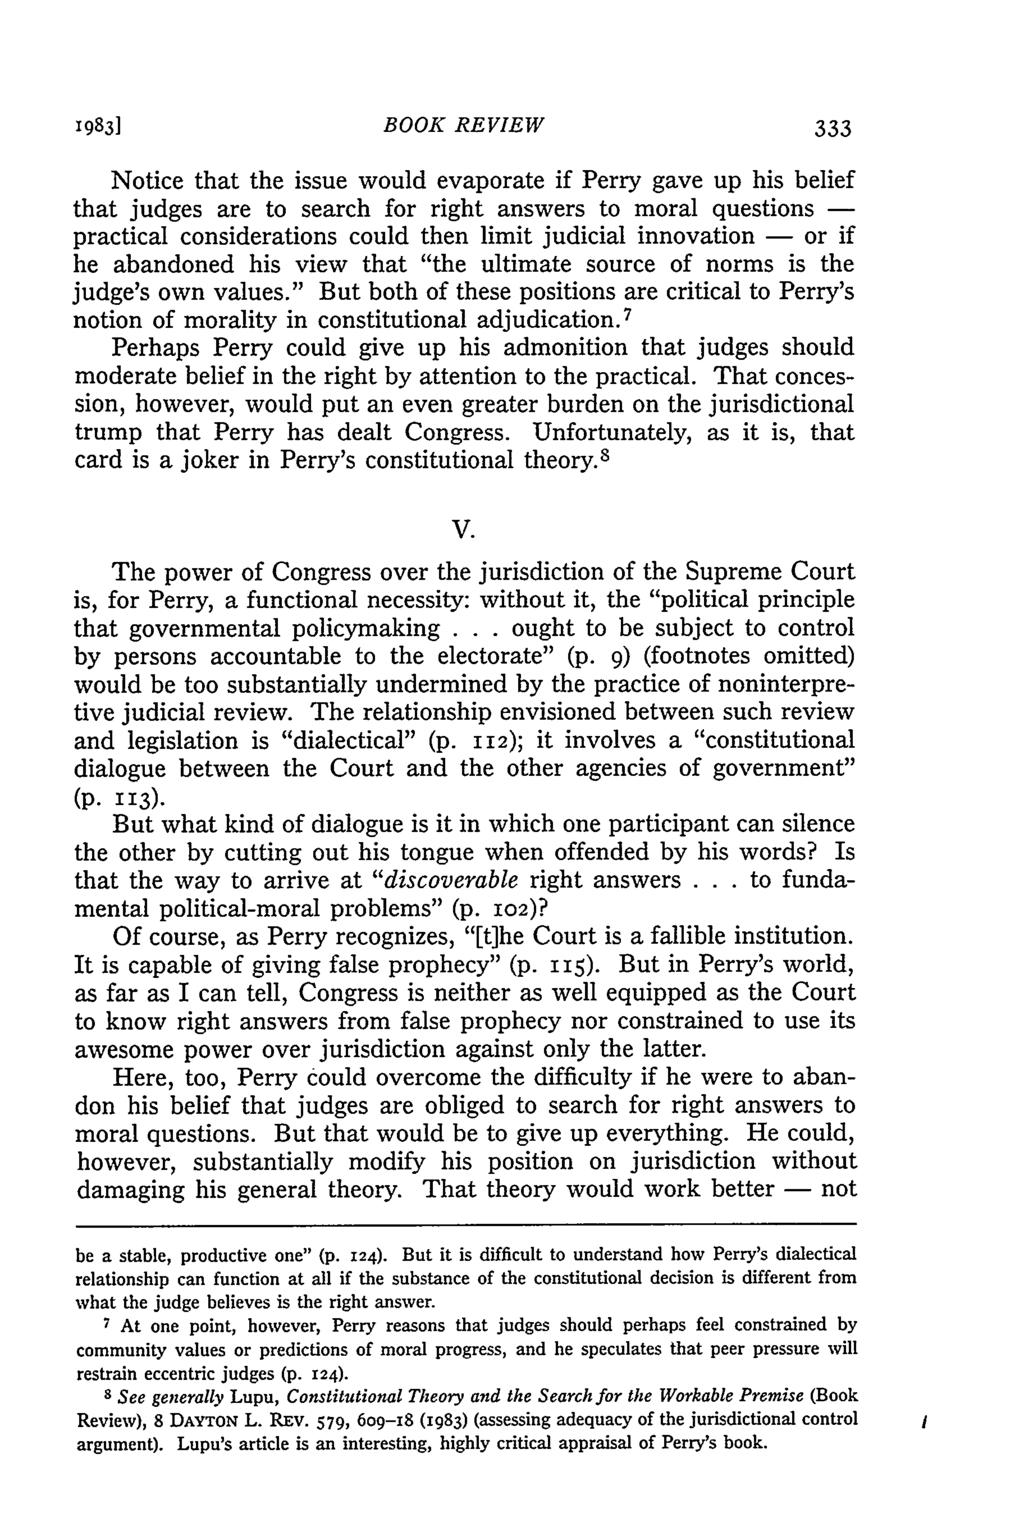 1983] BOOK REVIEW Notice that the issue would evaporate if Perry gave up his belief that judges are to search for right answers to moral questions - practical considerations could then limit judicial